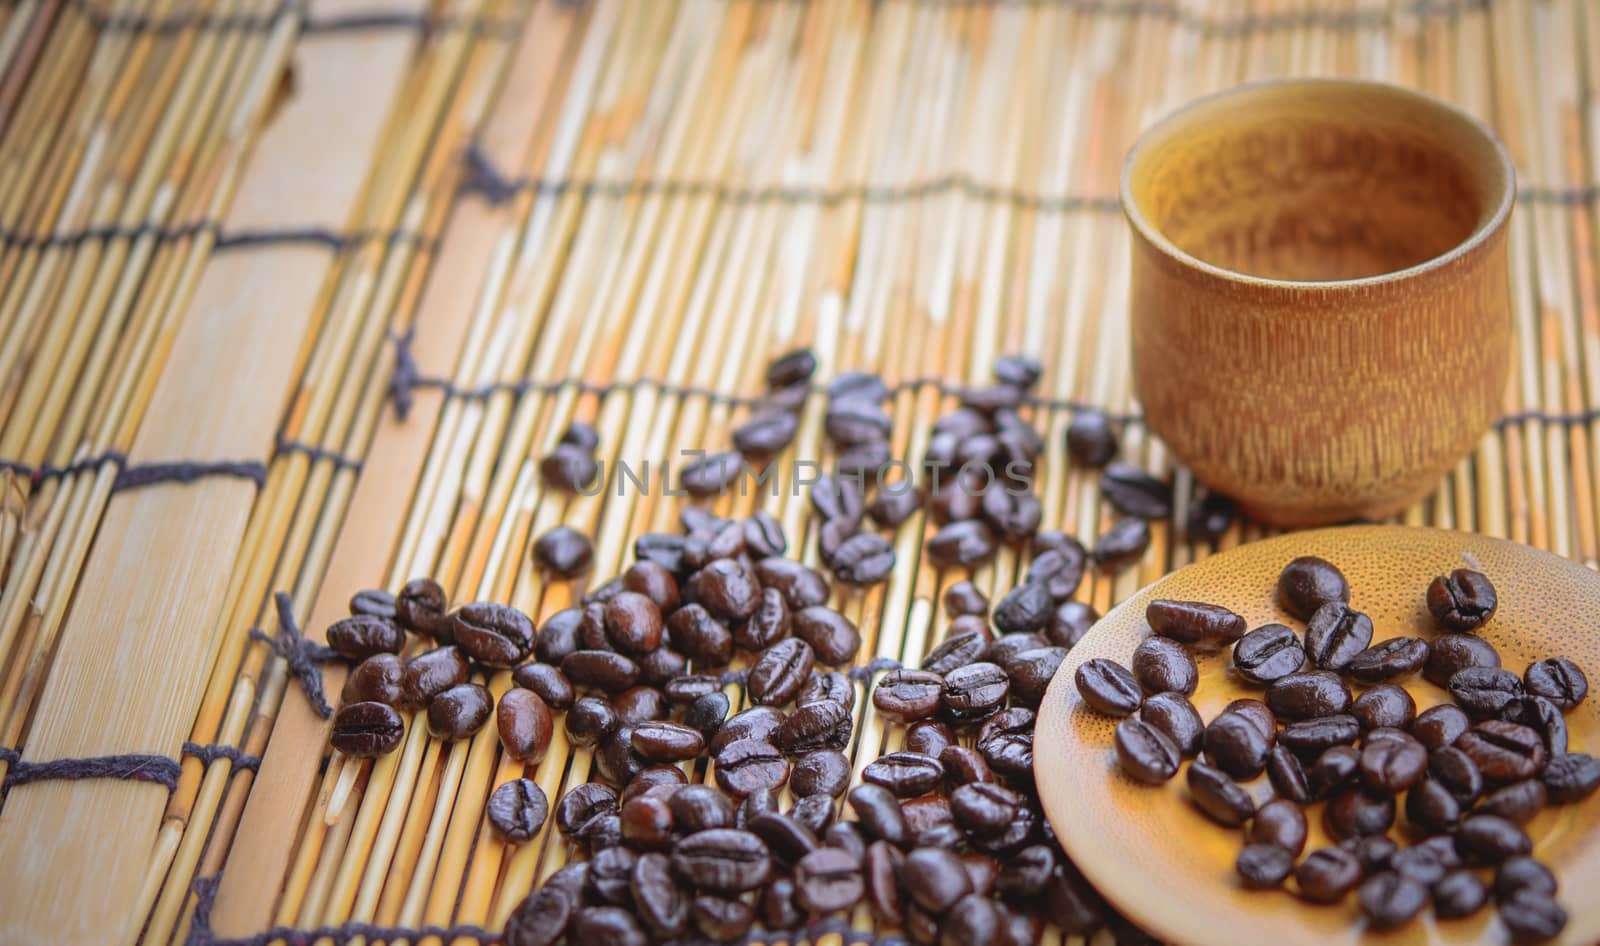 Photo in vintage color image style.Coffee beans and coffee cup set on bamboo wooden background.Soft focus.